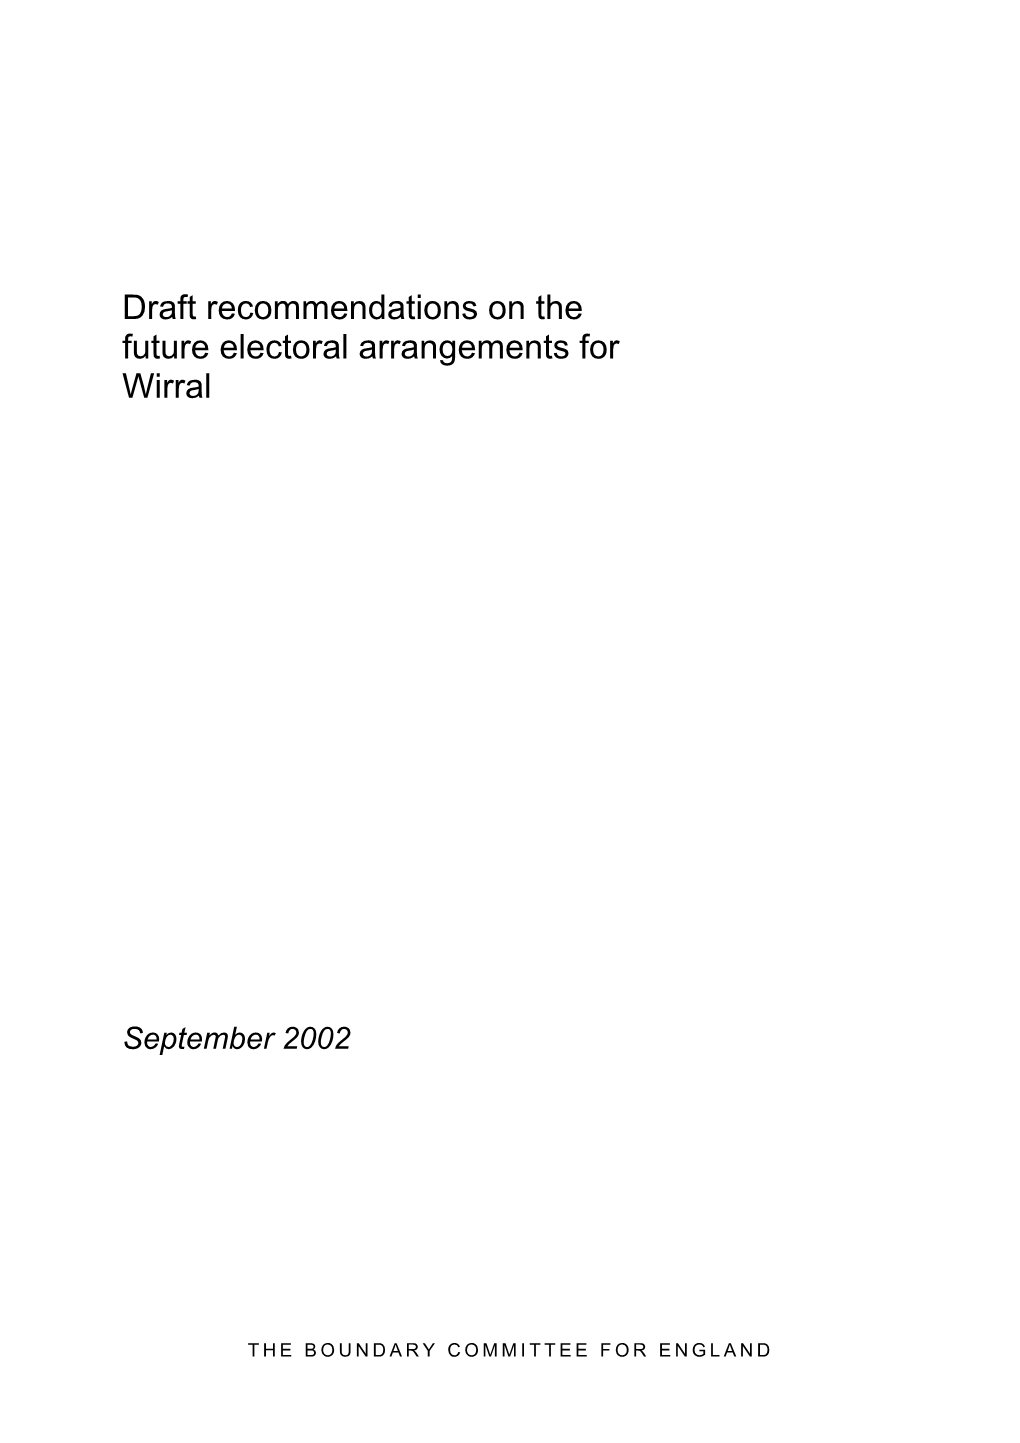 Draft Recommendations on the Future Electoral Arrangements for Wirral